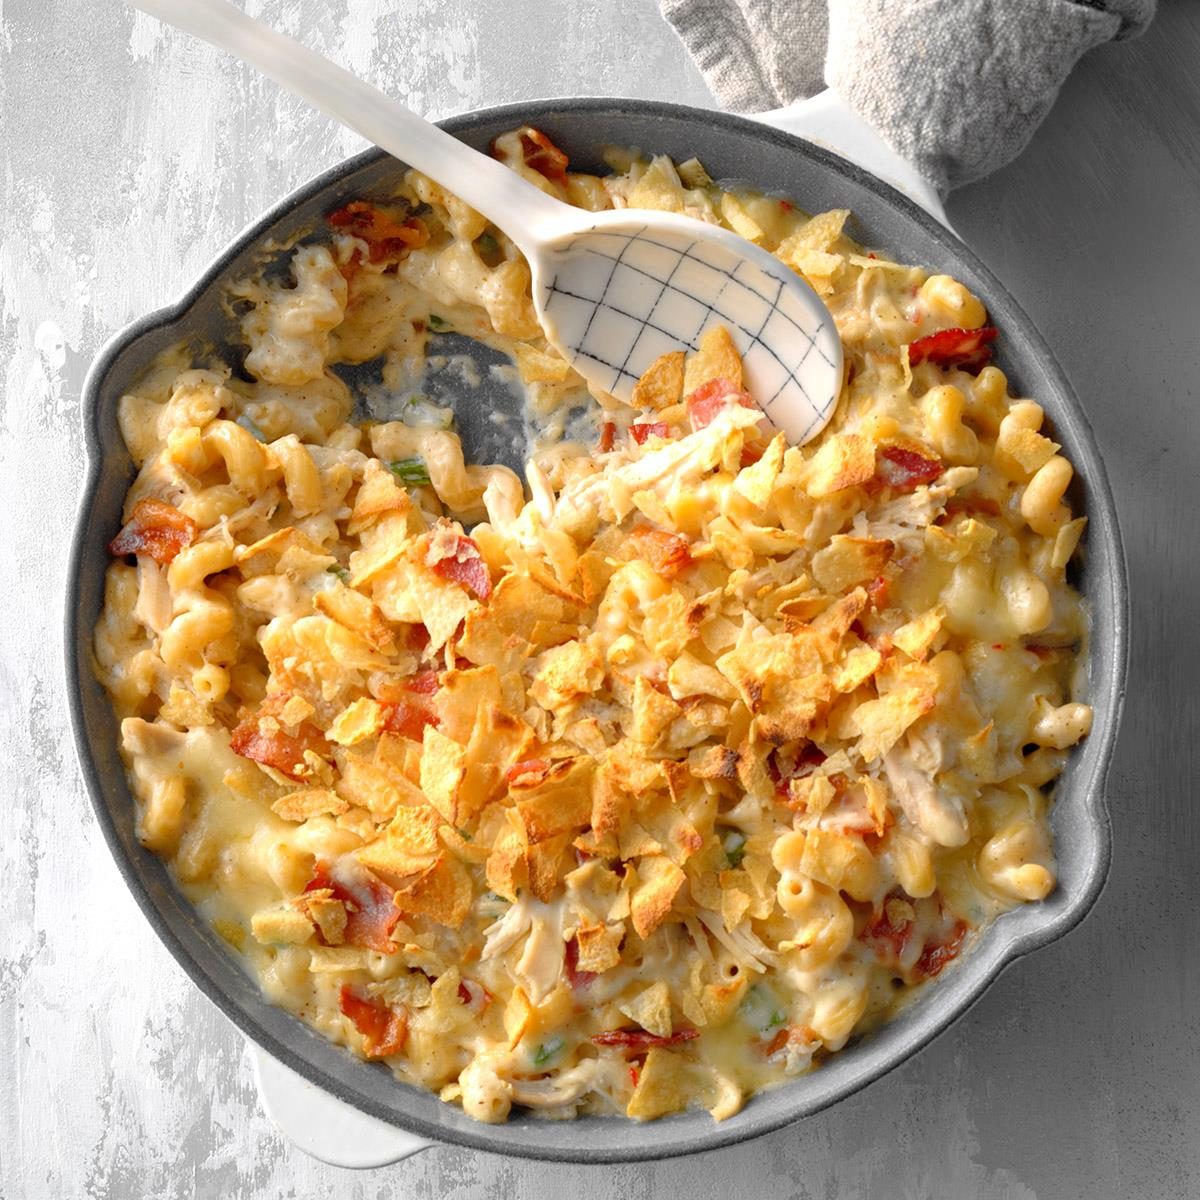 https://www.tasteofhome.com/wp-content/uploads/2018/06/Spicy-Chicken-and-Bacon-Mac_EXPS_SDAS18_215224_D03_27__6b.jpg